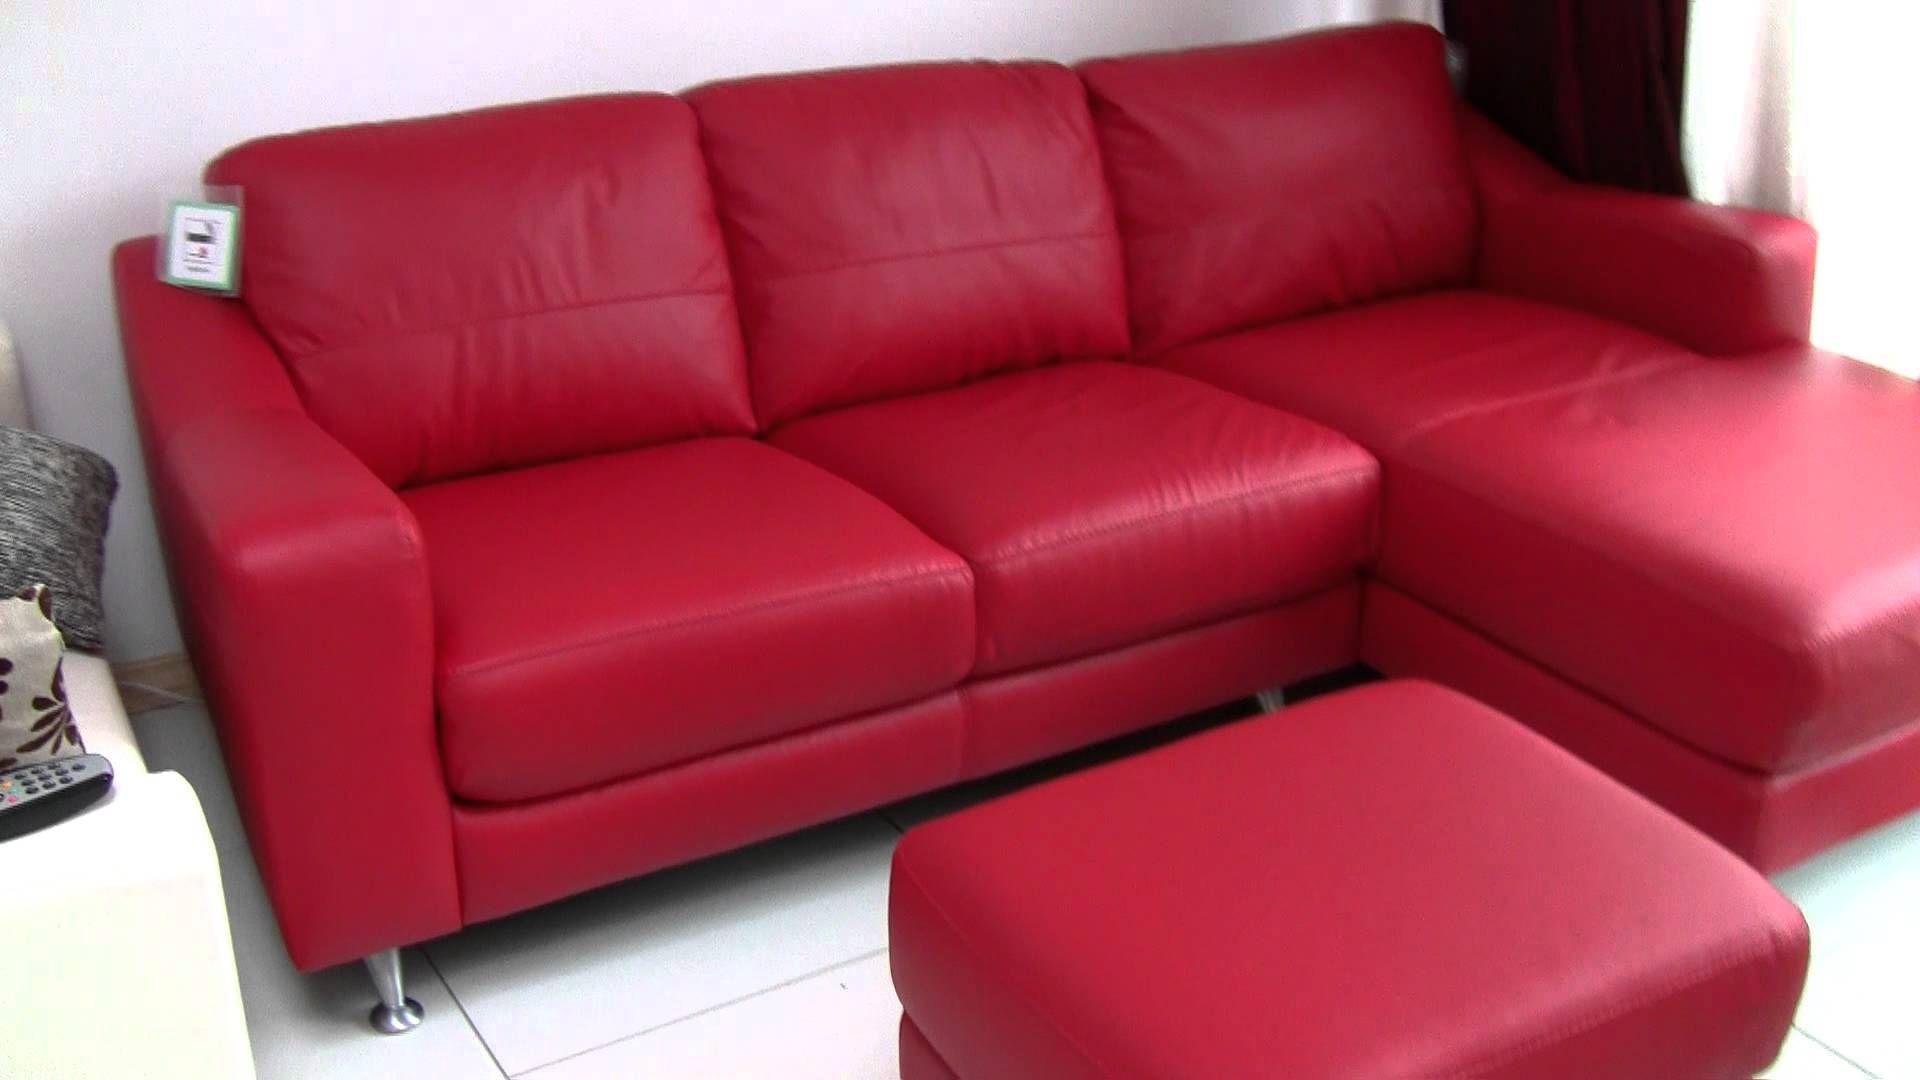 Dfs Leather Corner Sofa For Sale £500 – Youtube Pertaining To Leather Corner Sofa Bed (View 18 of 30)